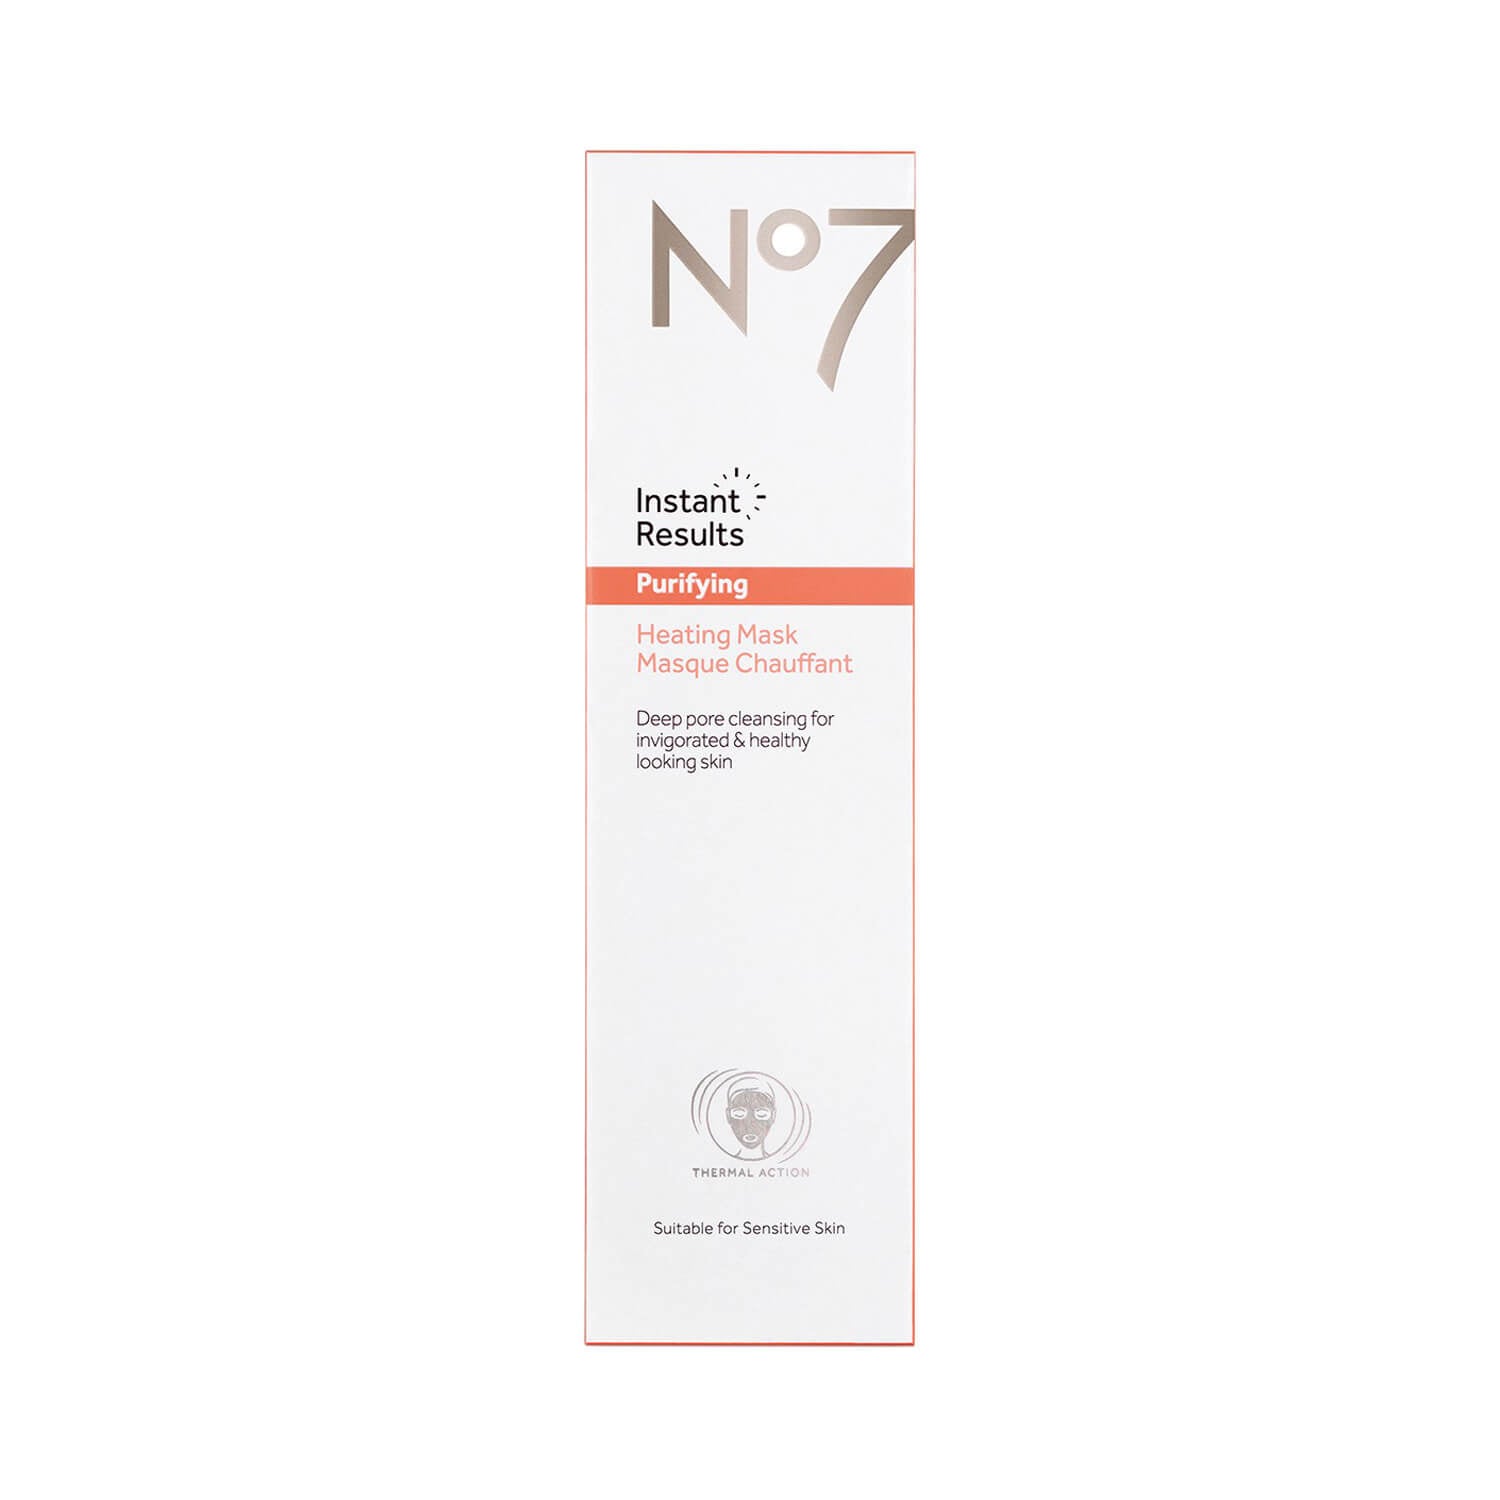 No7 Instant Results Purifying Heating Mask